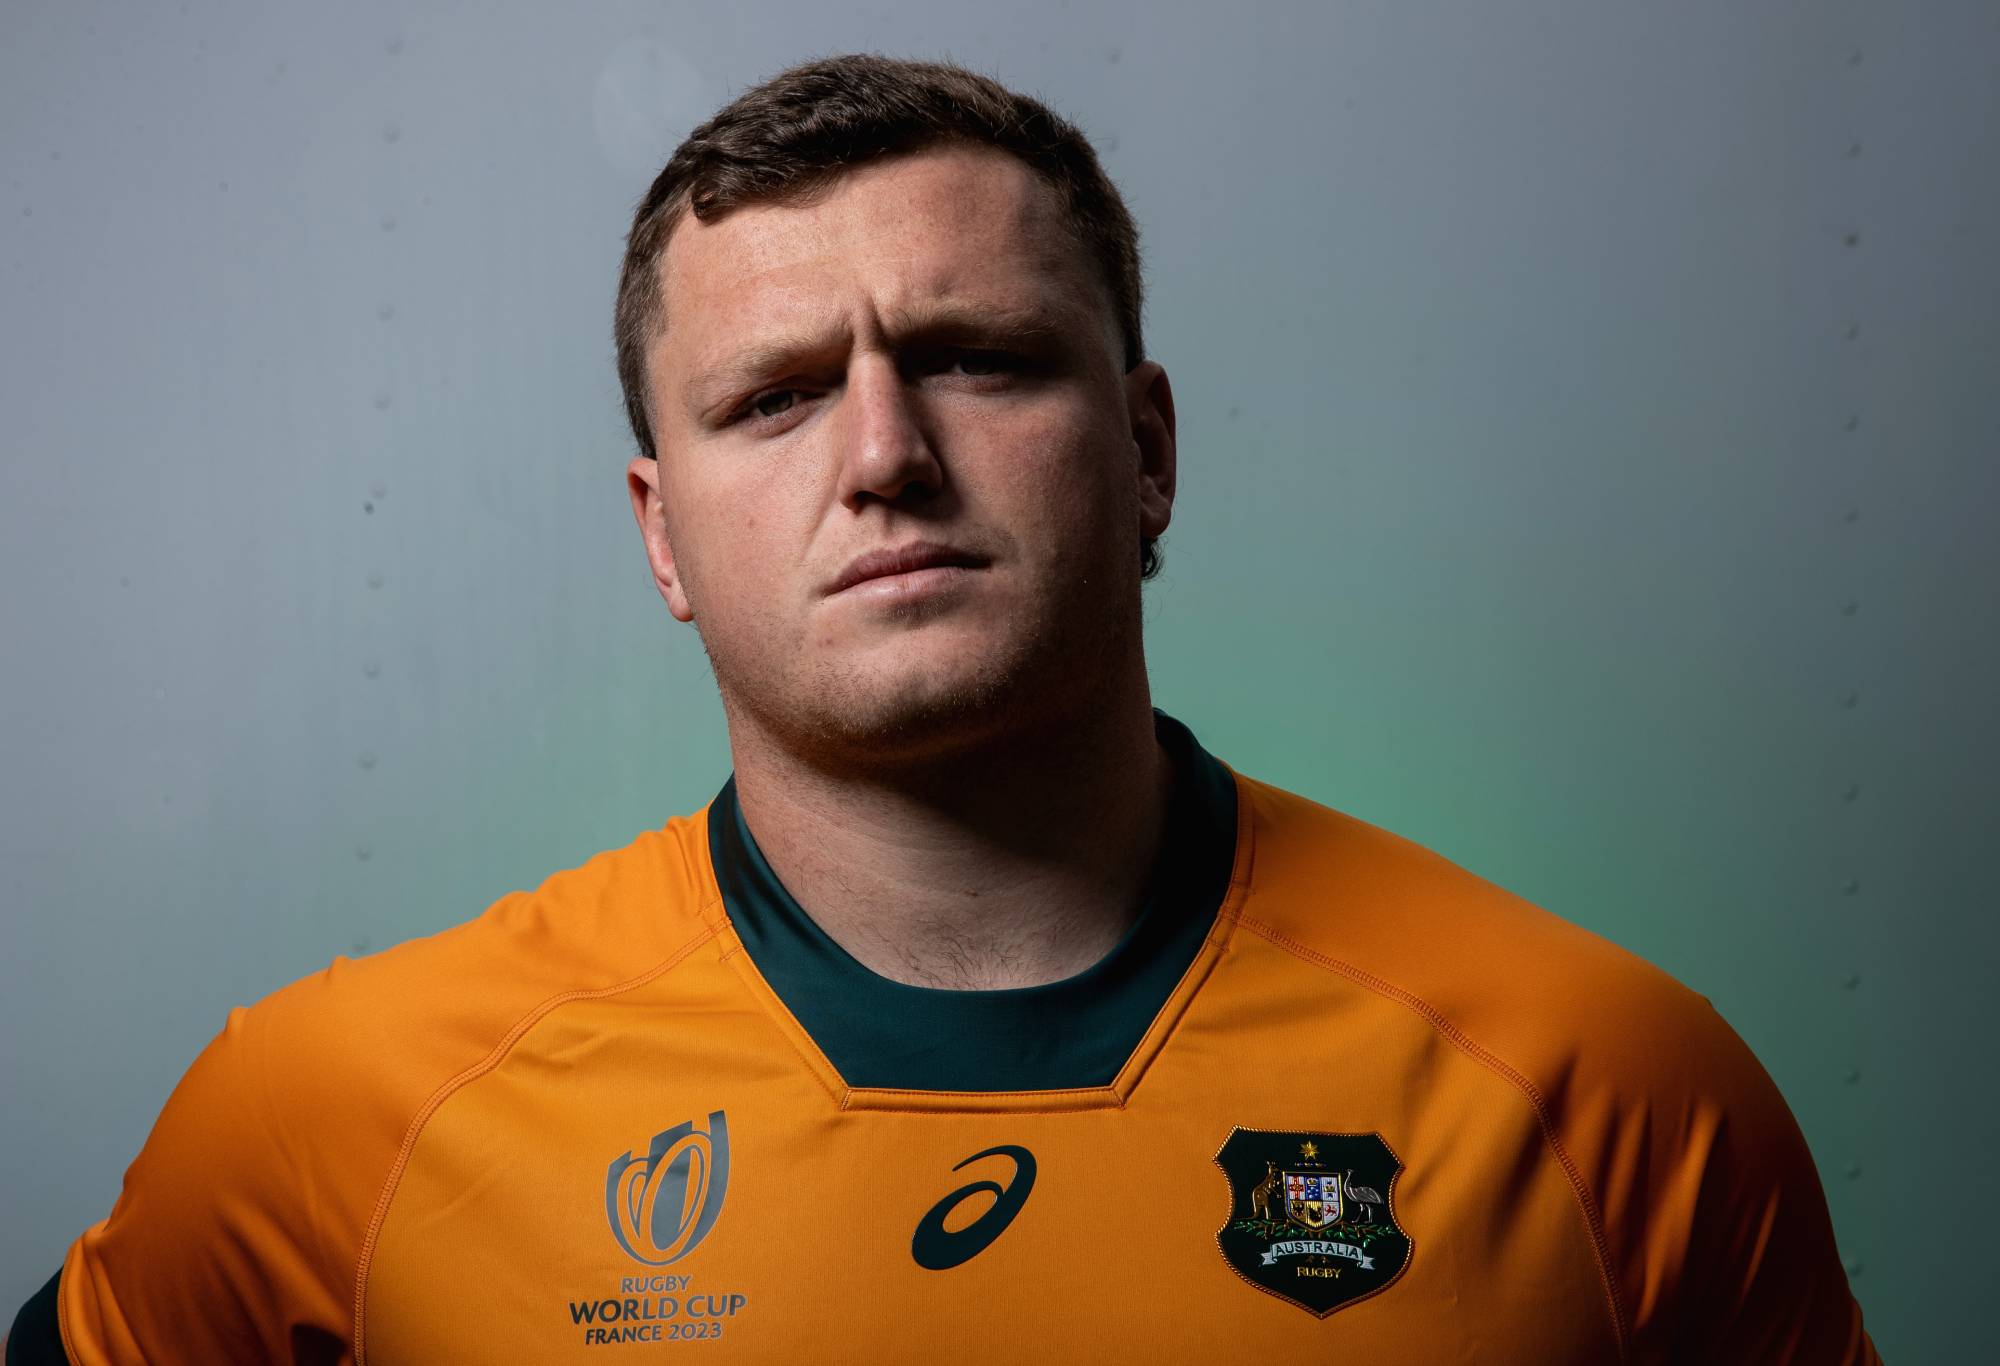 Angus Bell of the Wallabies poses for a portrait following a Rugby Australia media opportunity launching the Wallabies 2023 Rugby World Cup jersey, at Coogee Oval on June 22, 2023 in Sydney, Australia. (Photo by Cameron Spencer/Getty Images)